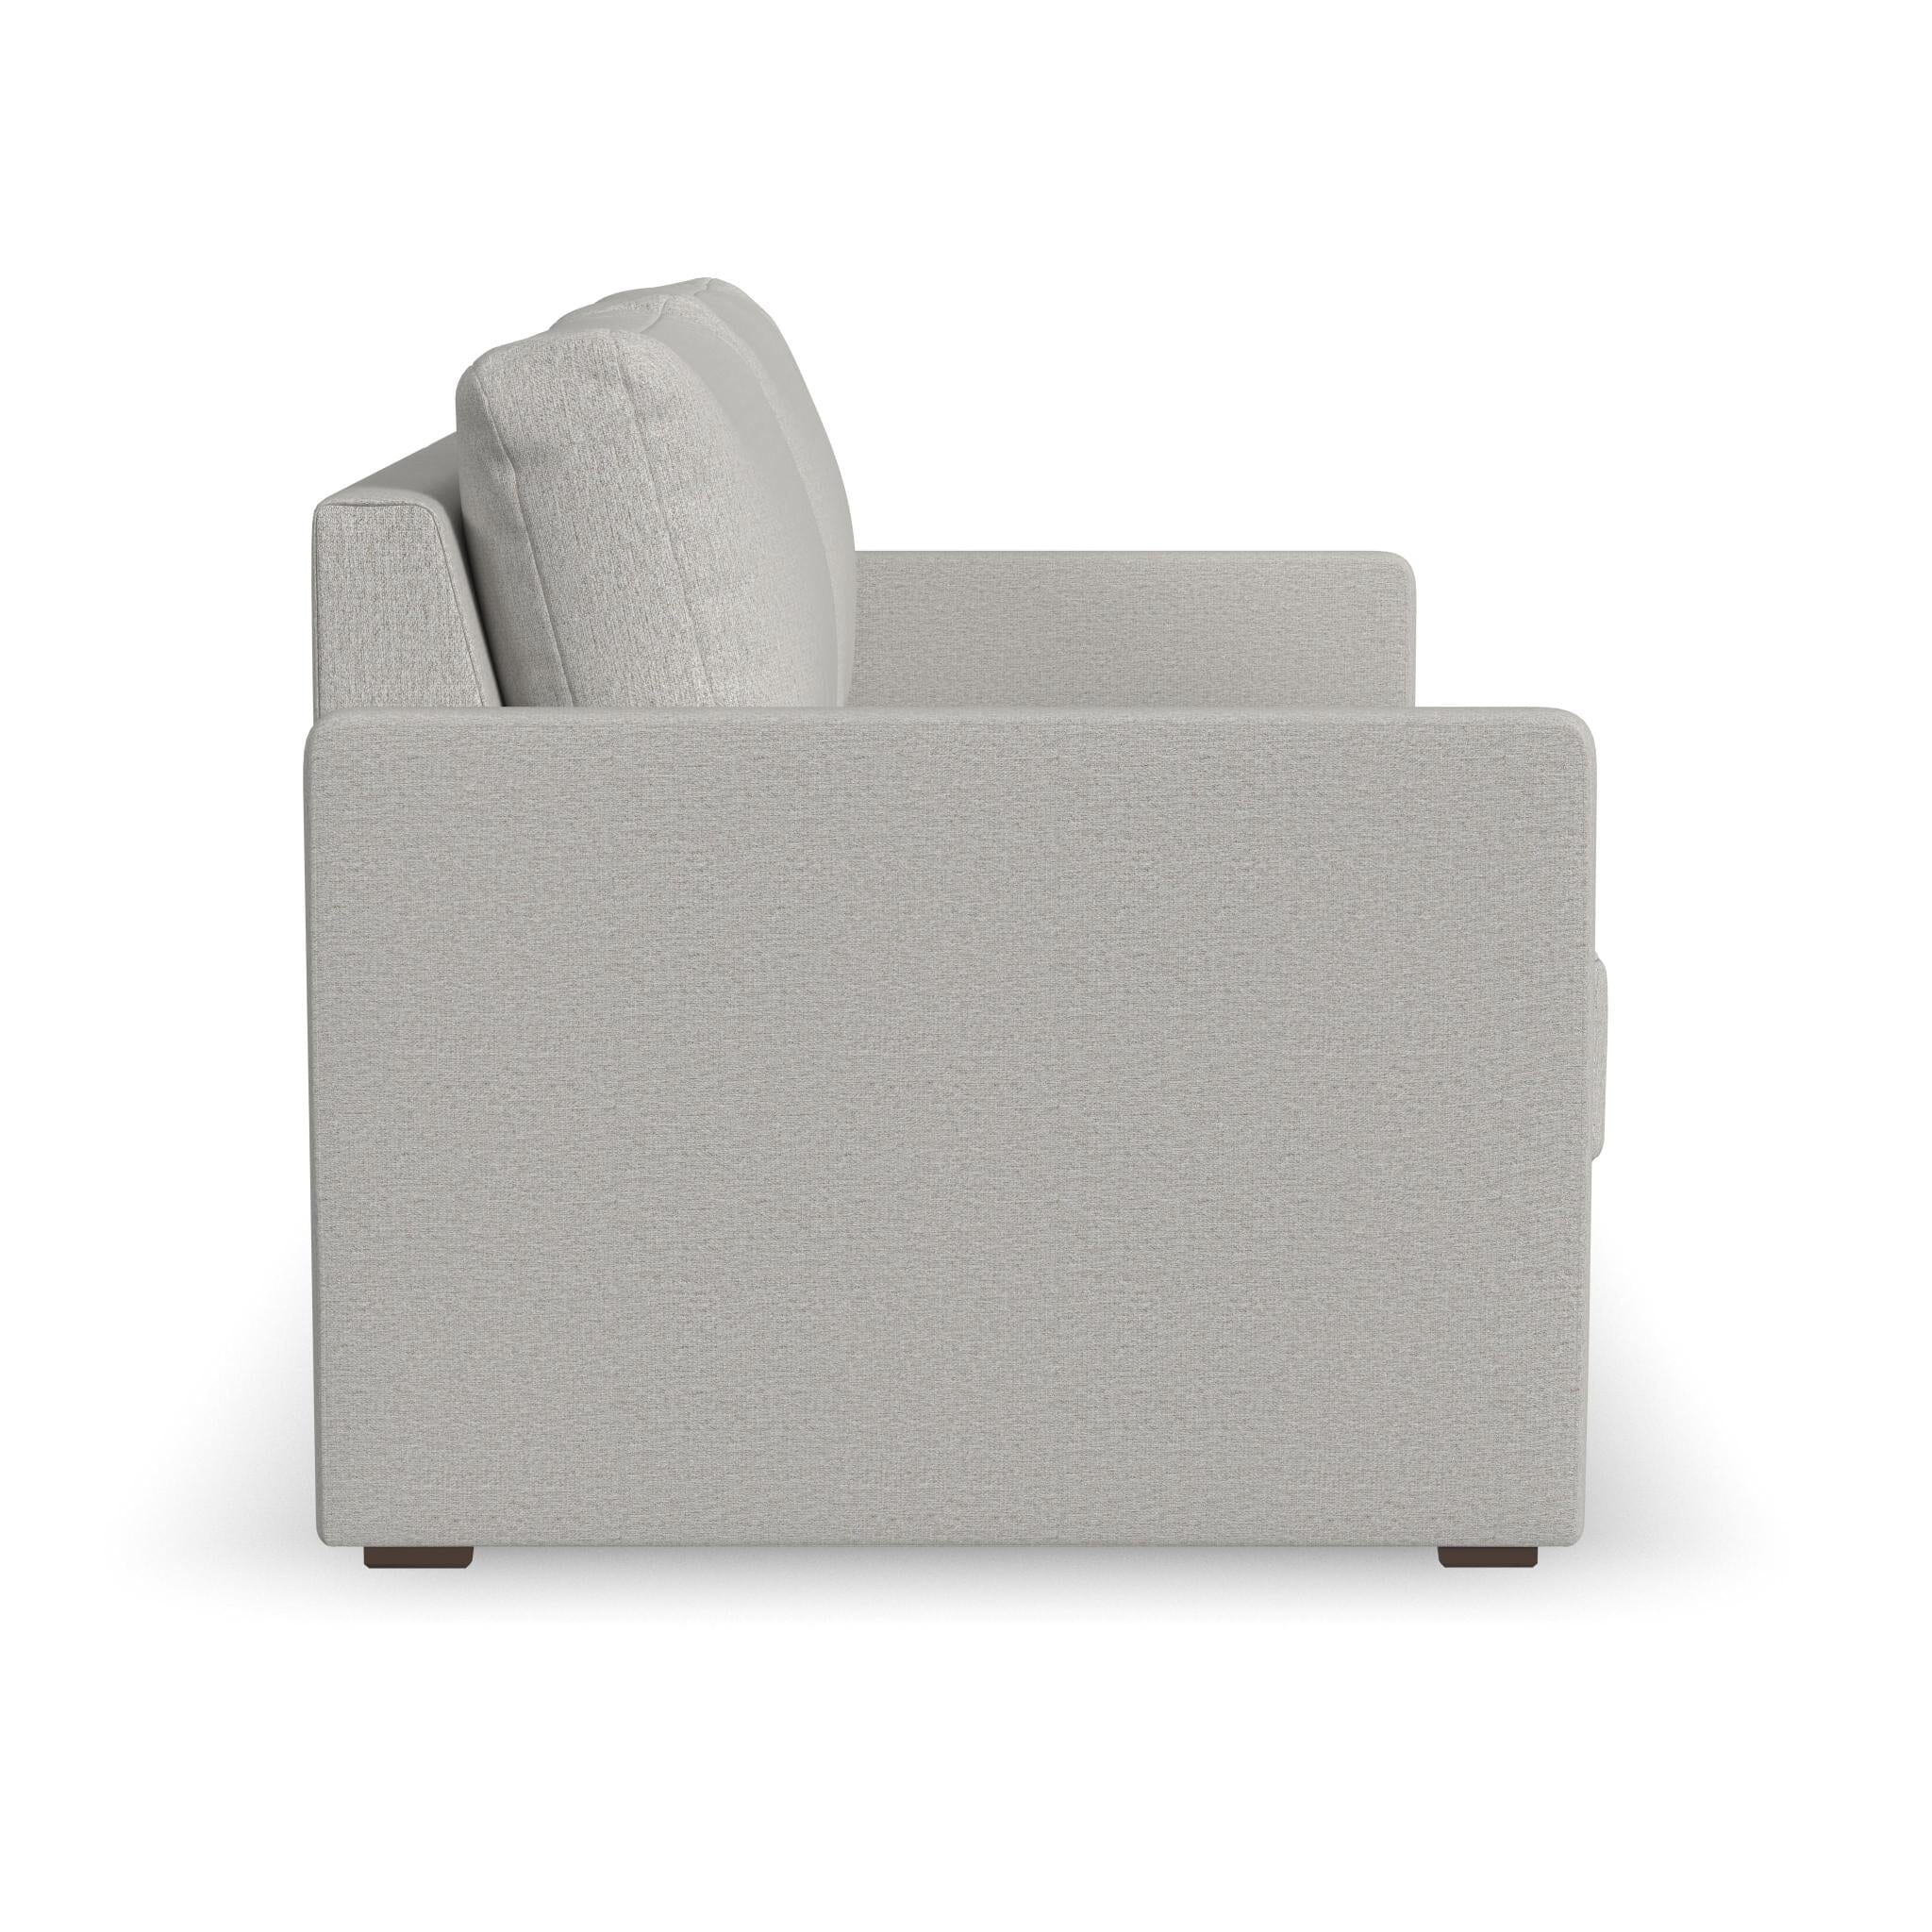 Traditional Loveseat with Narrow Arm By Flex Loveseat Flex